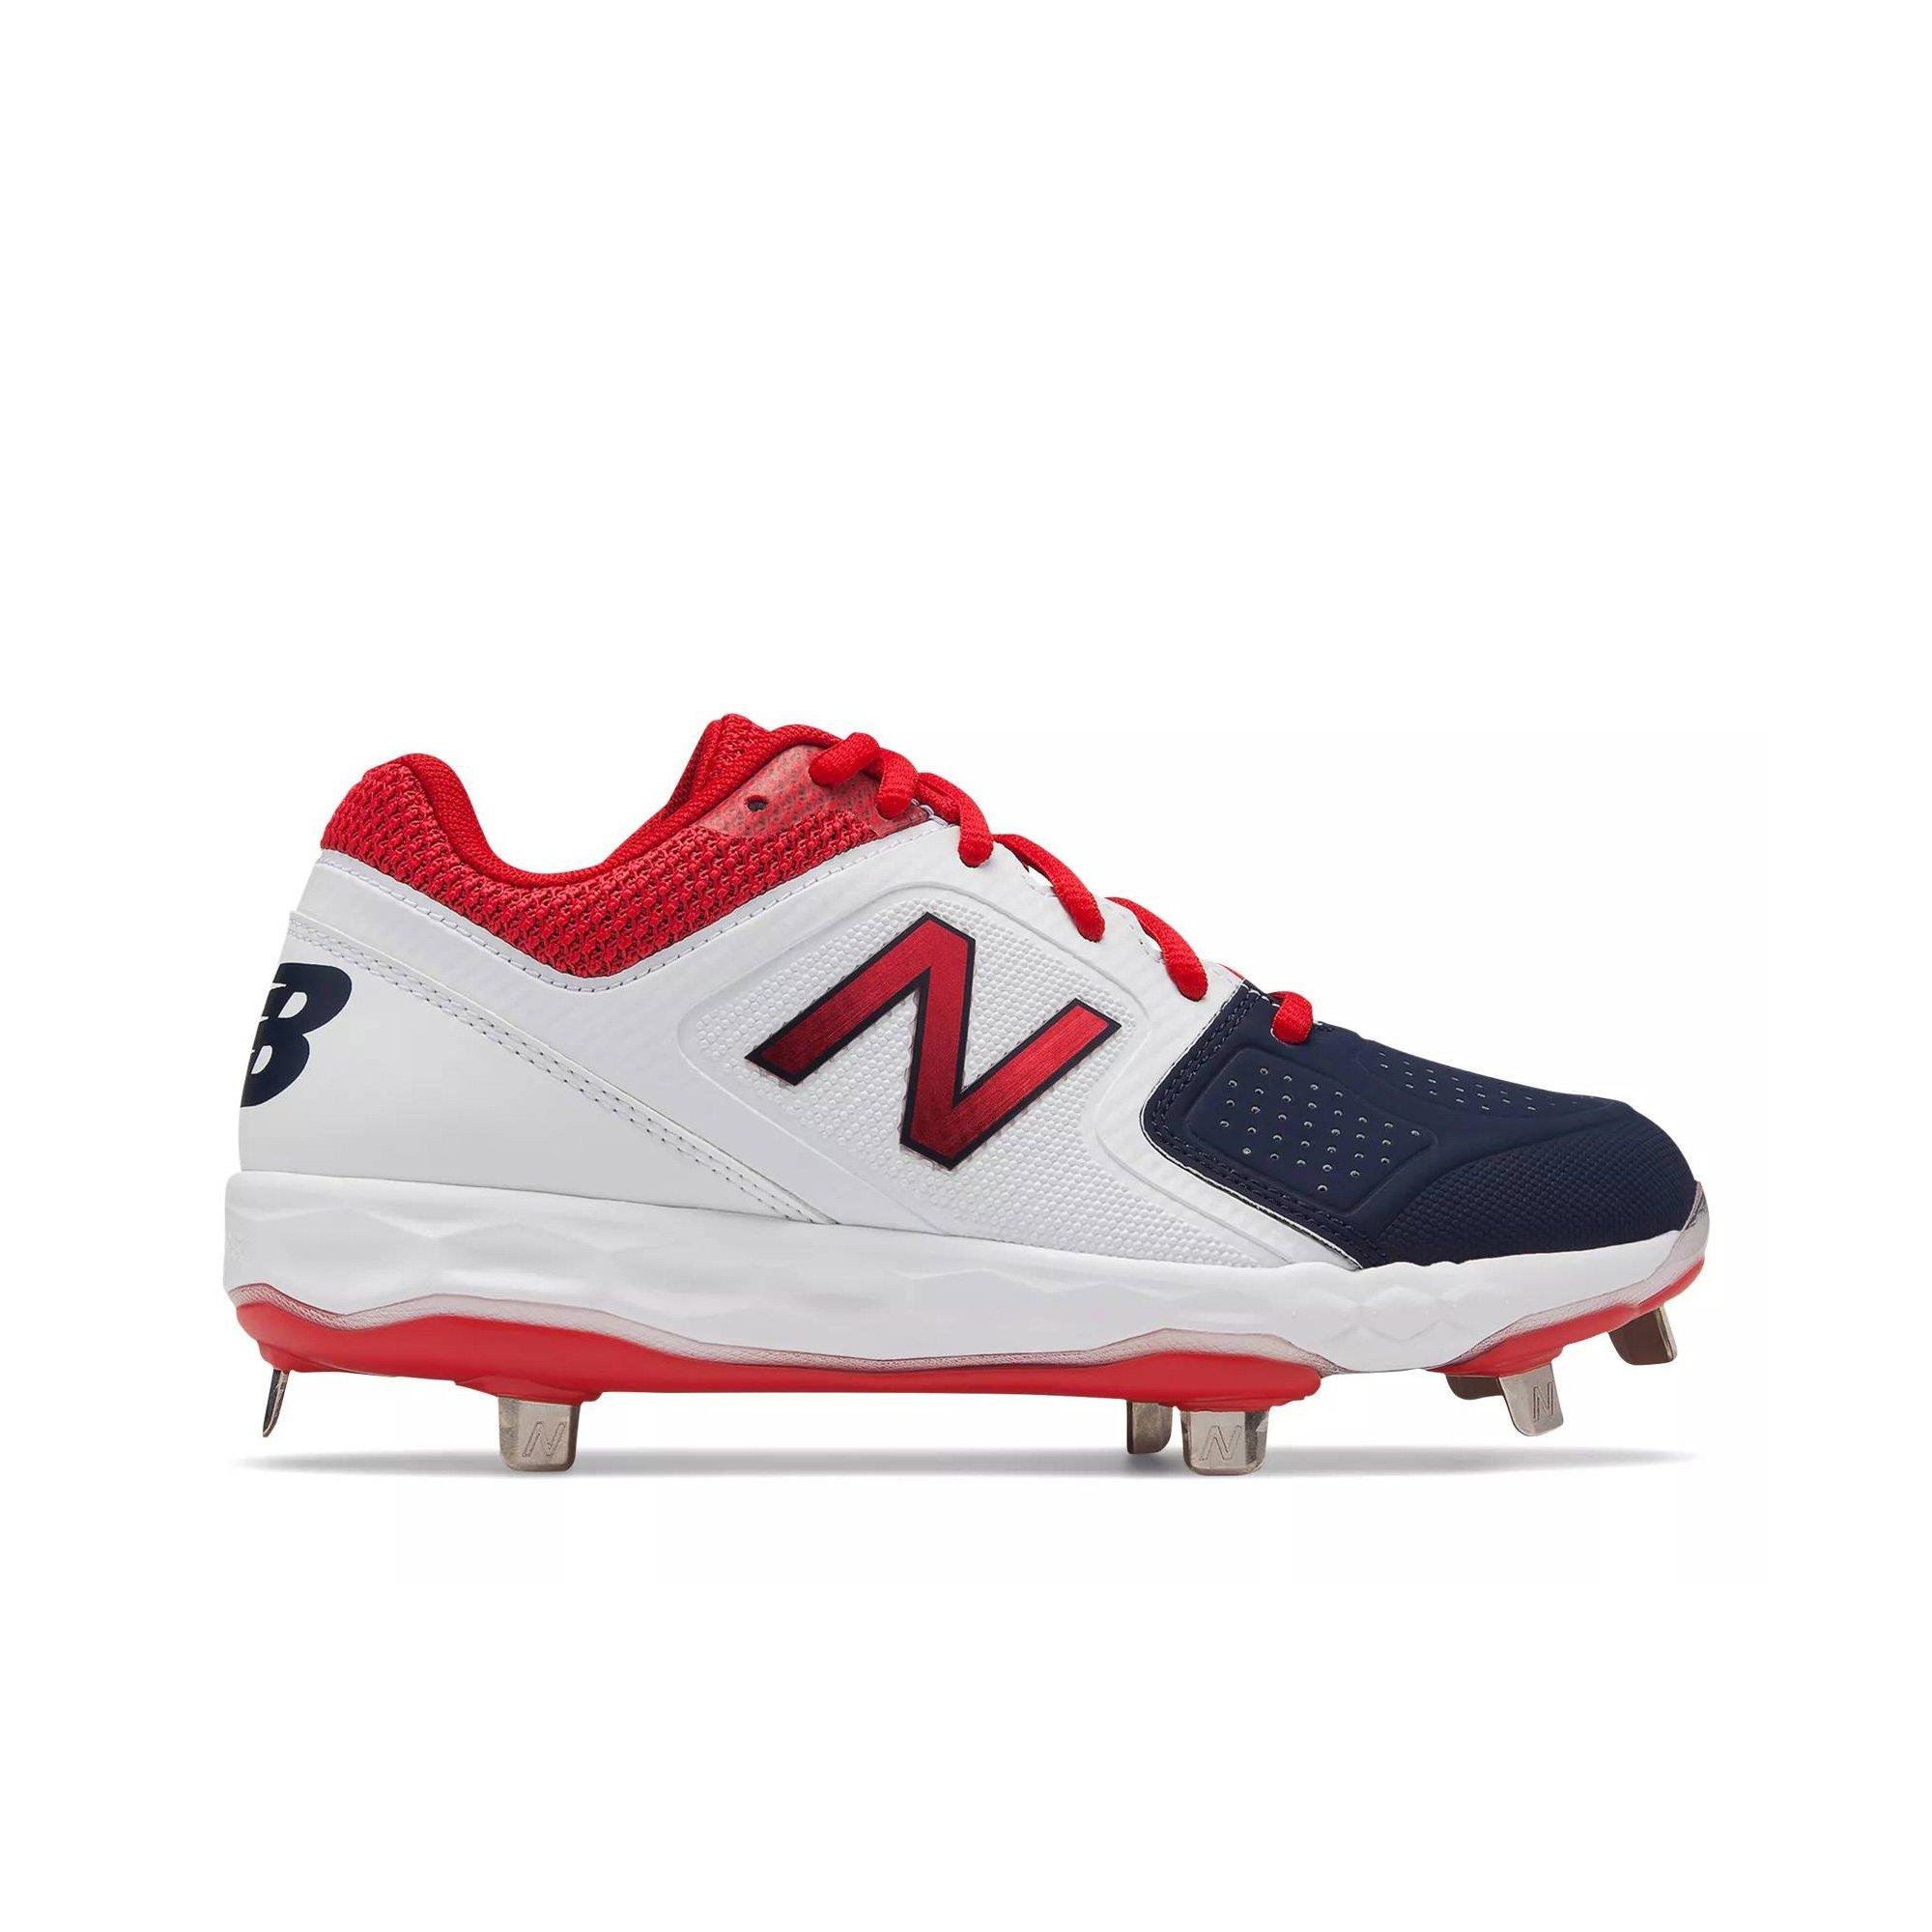 red and white new balance cleats